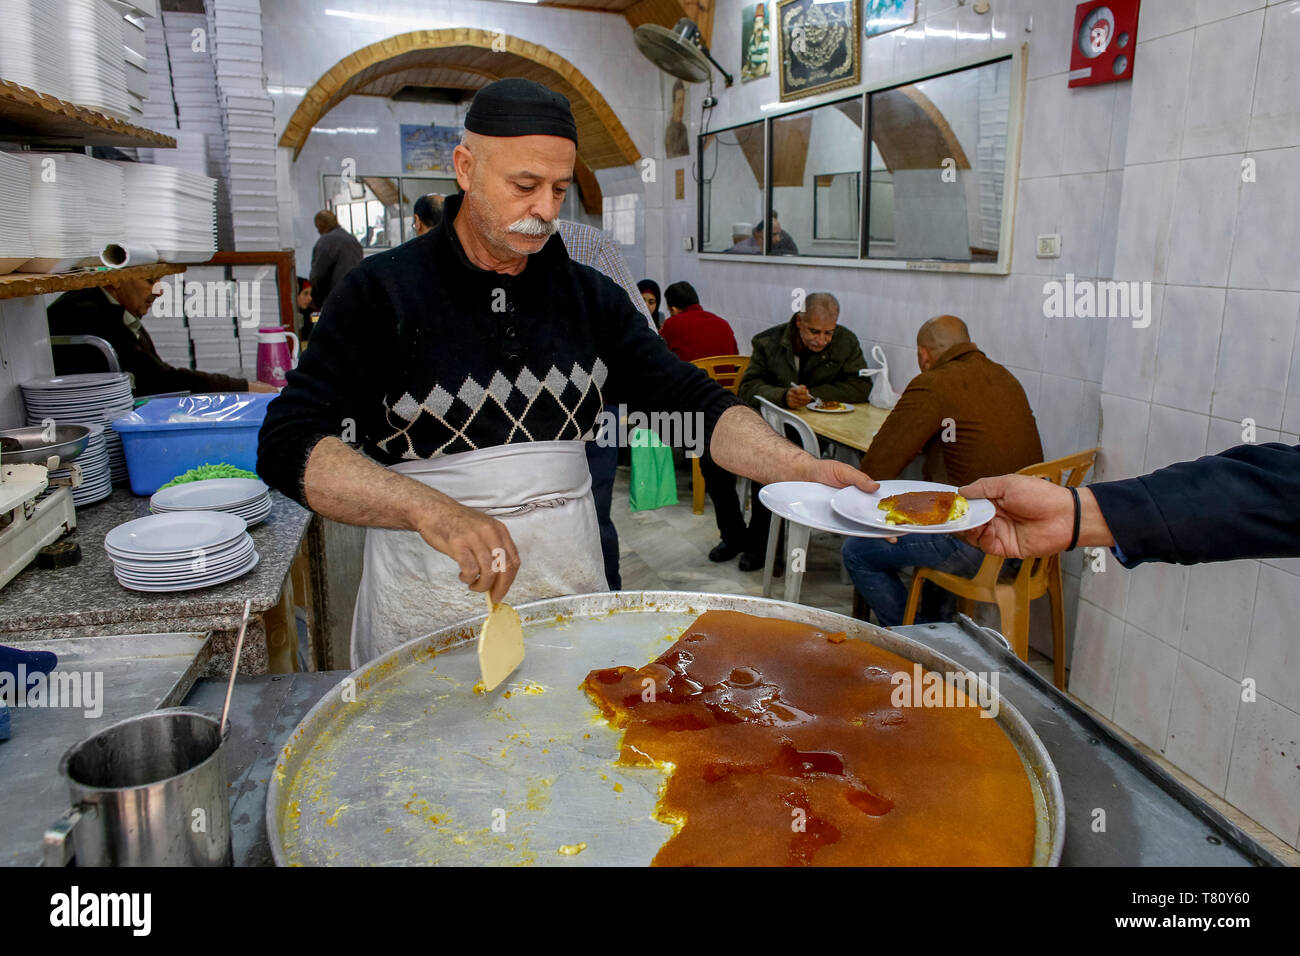 The most famous knaffieh (Palestinian cheese pastry) shop in Nablus, West Bank, Palestine, Middle East Stock Photo